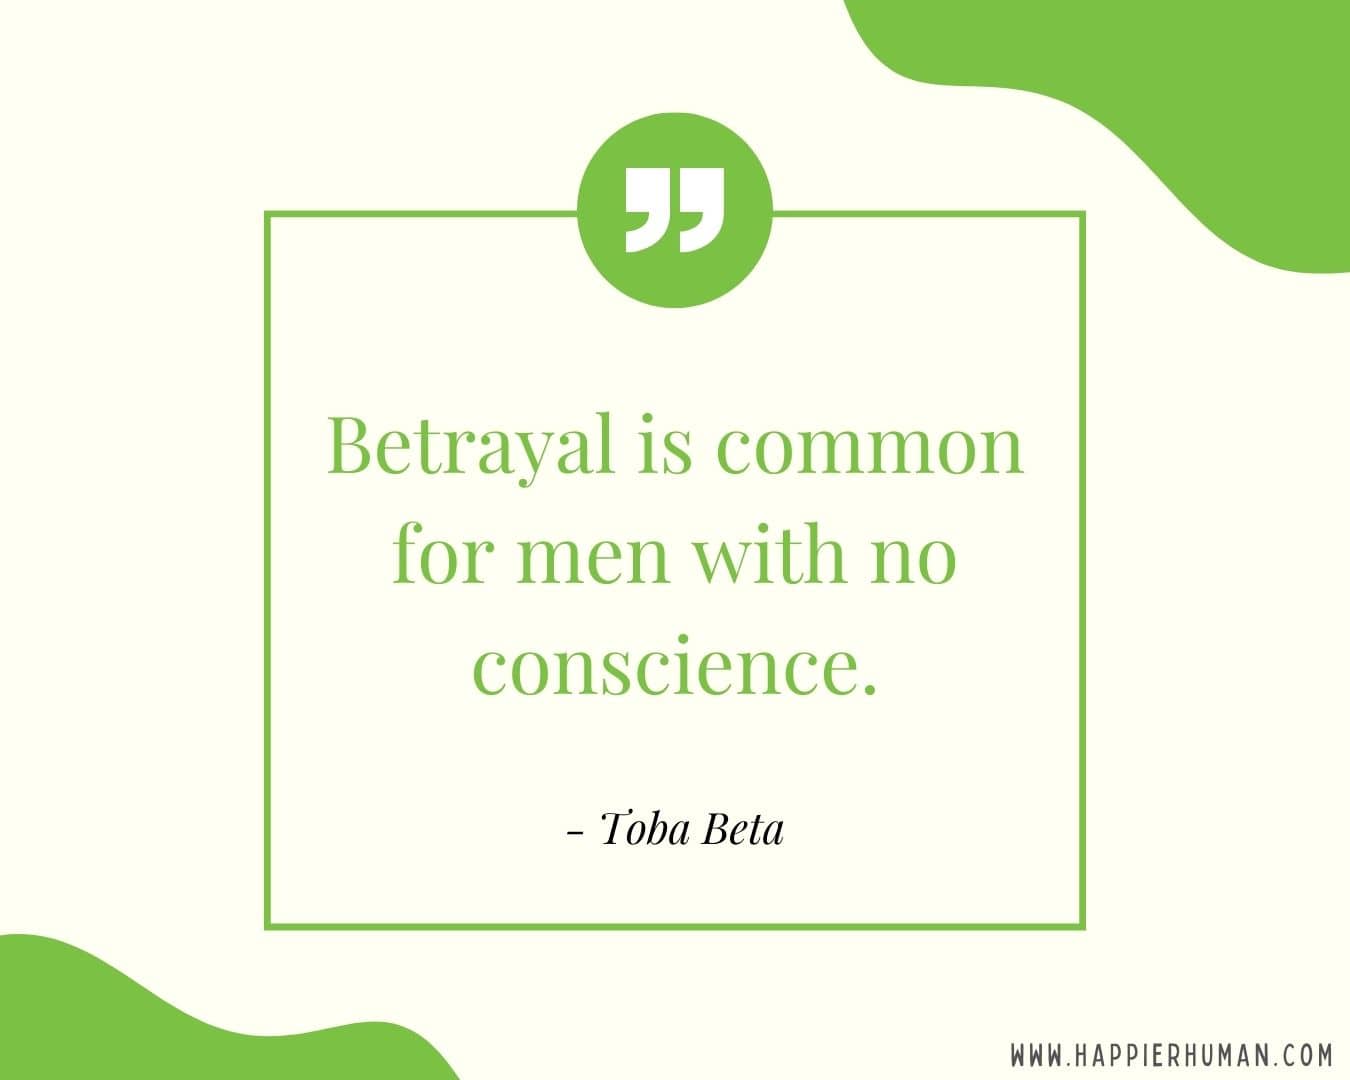 Broken Trust Quotes - “Betrayal is common for men with no conscience.” - Toba Beta